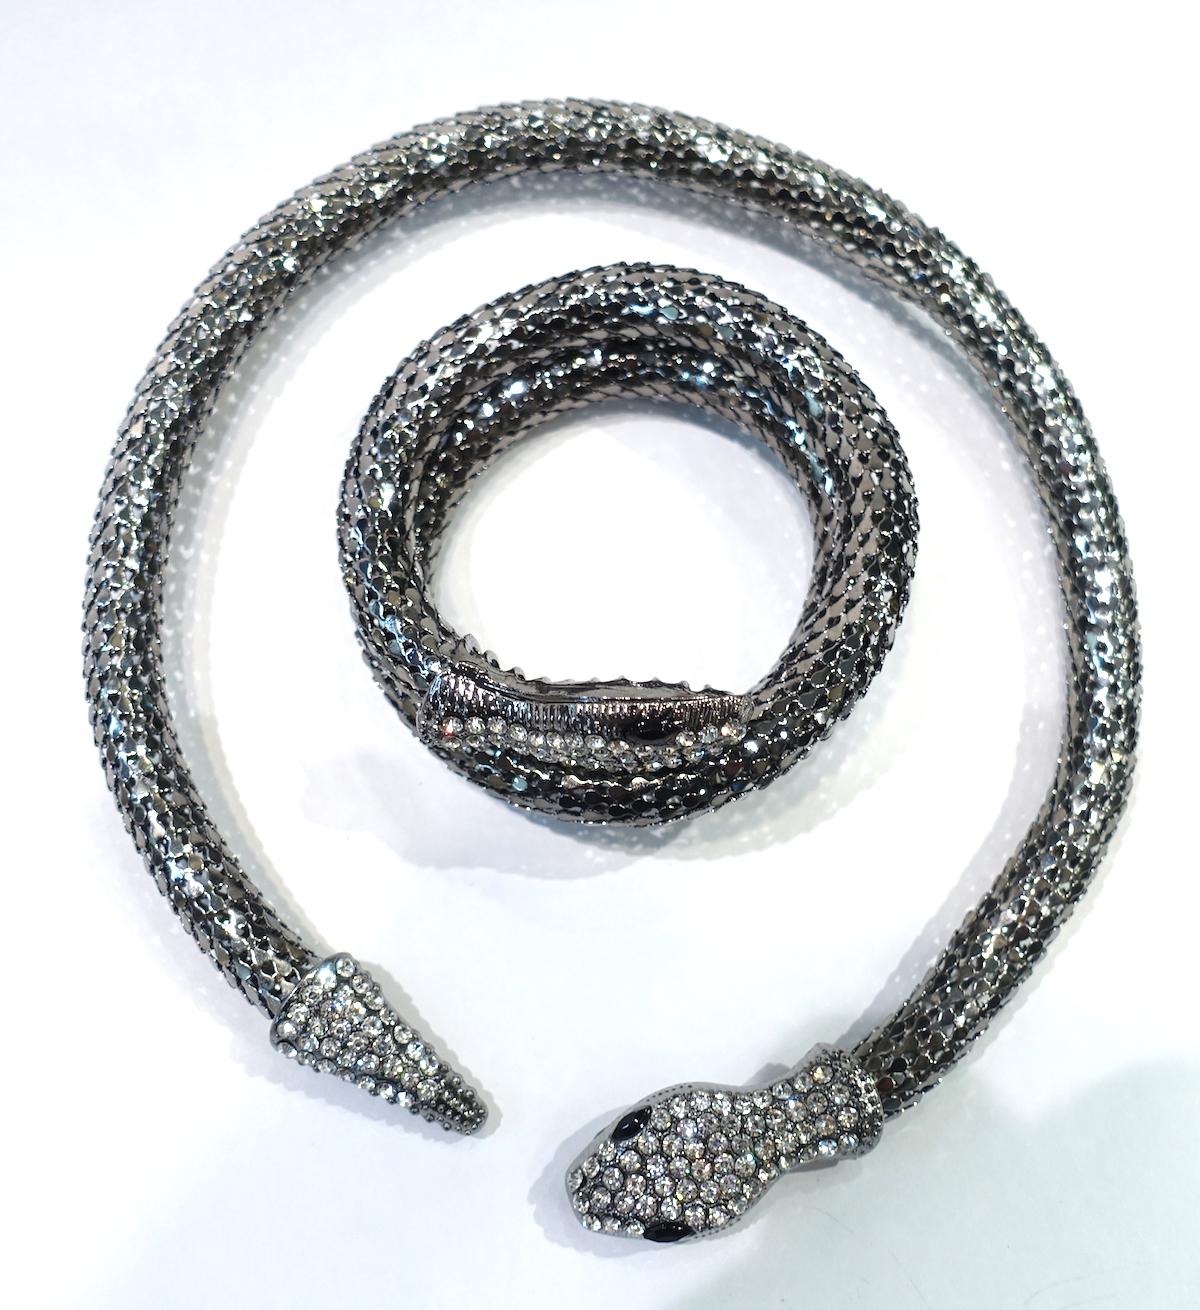 This vintage set features a snake design with black and clear crystals in a silver tone setting.  The wrap bracelet measures 14” x 5/8”; the necklace is 16-1/2” x 5/8”.  This vintage necklace & bracelet set is in excellent condition.